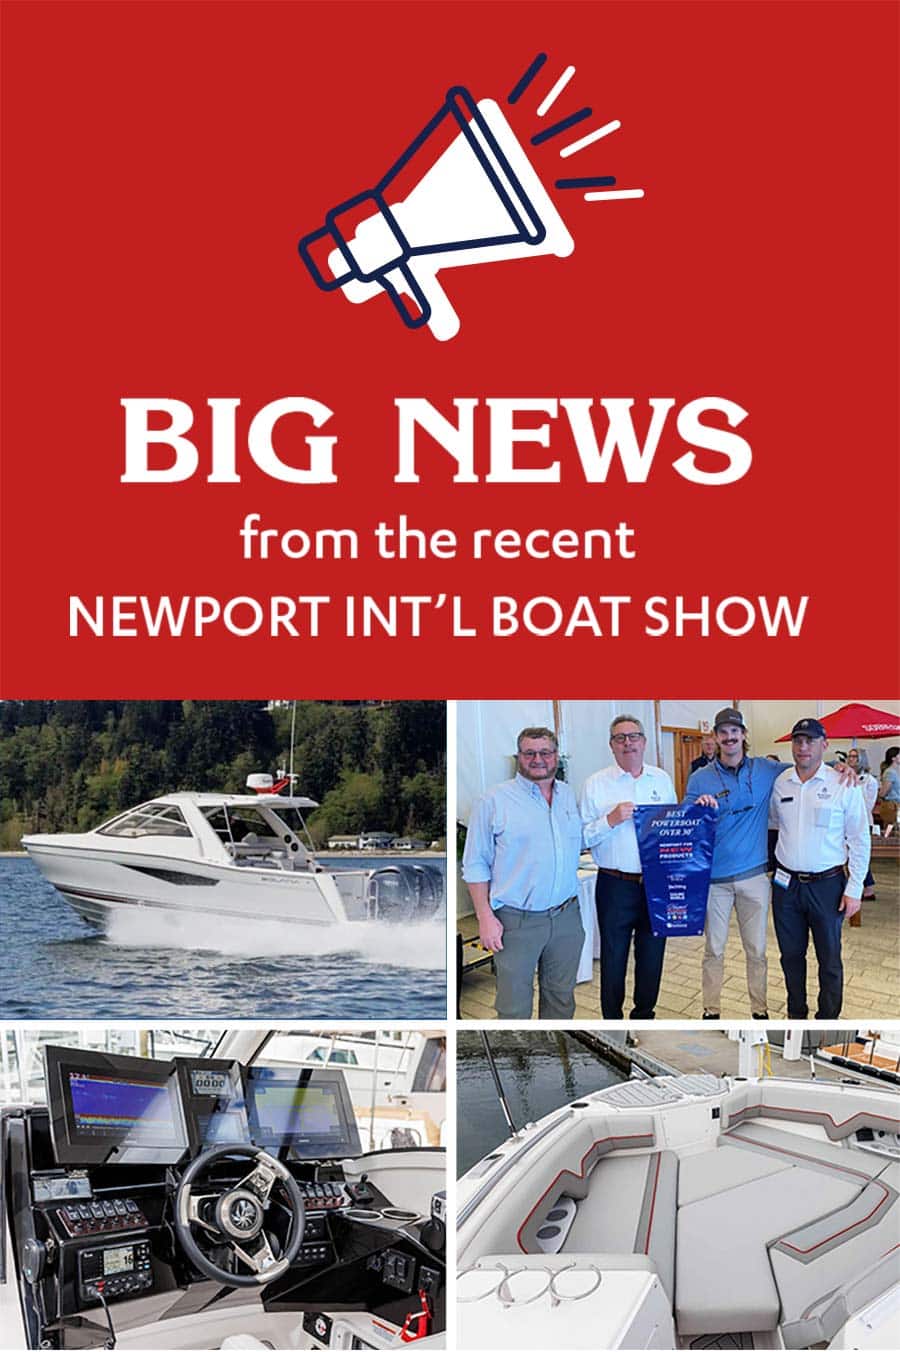 BIG NEWS from the recent NEWPORT INT’L BOAT SHOW: The New Solara S-310 Coupe is a DOUBLE WINNER!!!